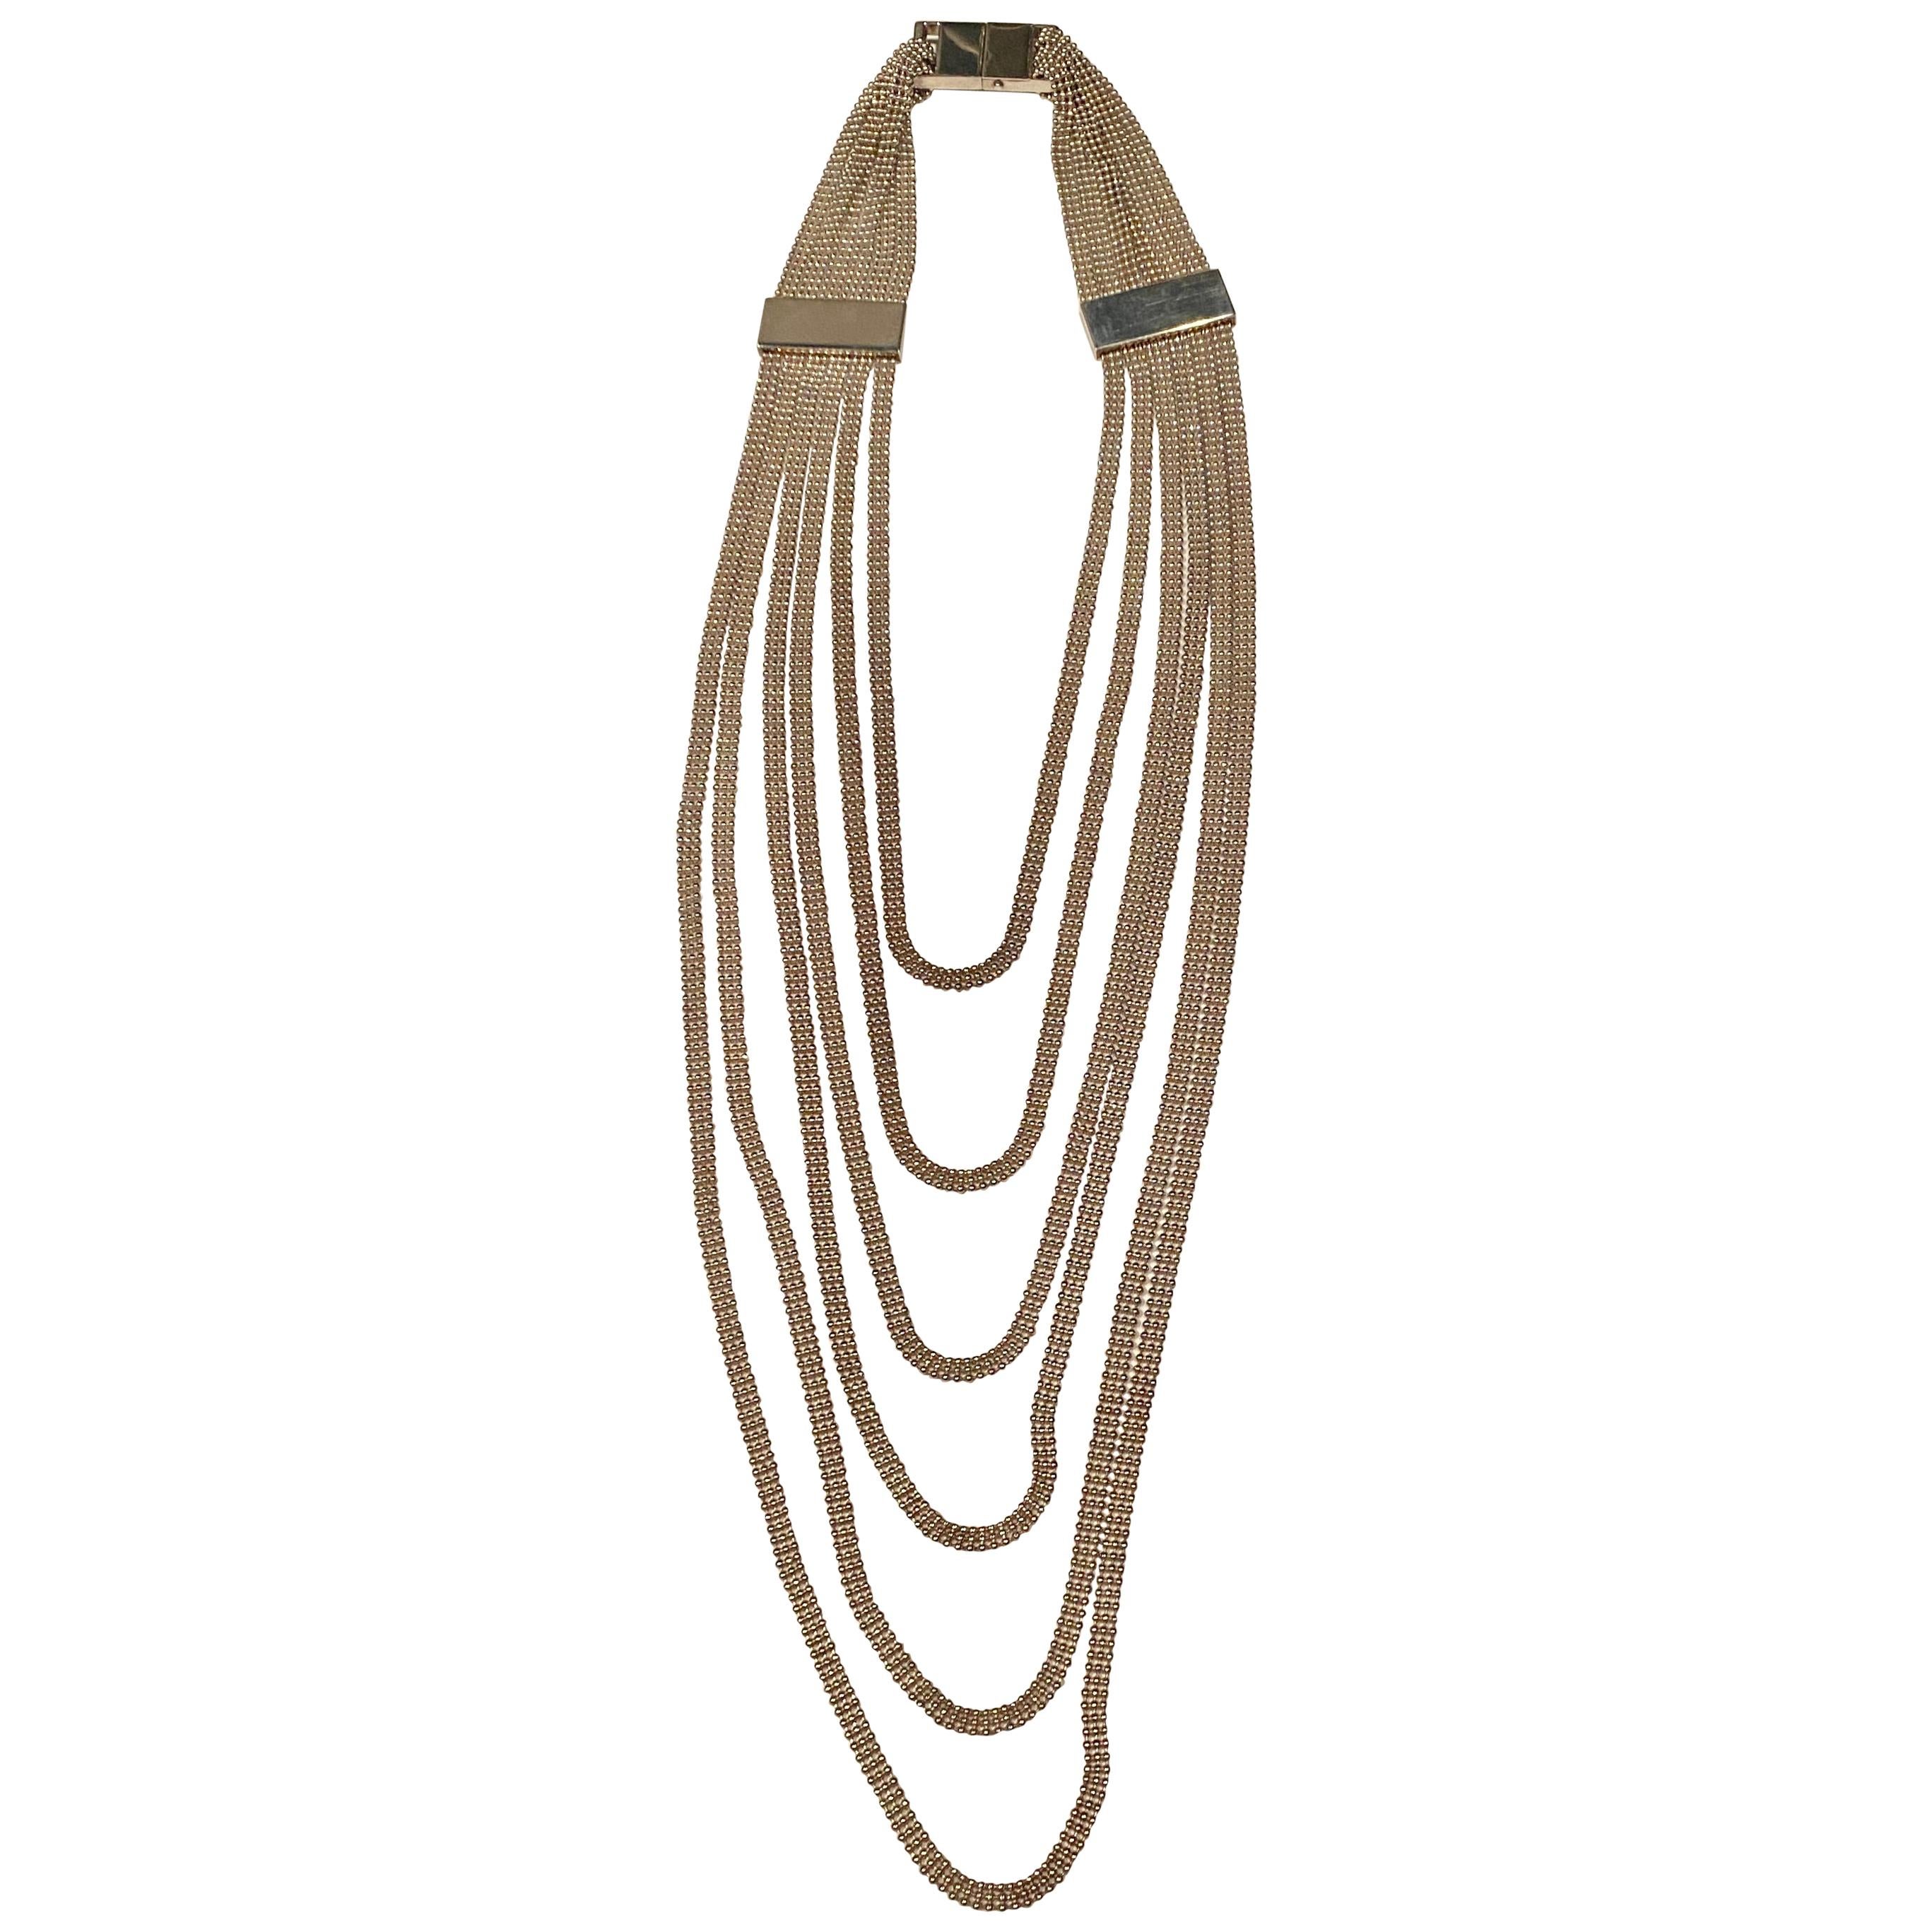 Adeline Cacheux "Perles Fluidity" Six-Strand Necklace by Christofle For Sale